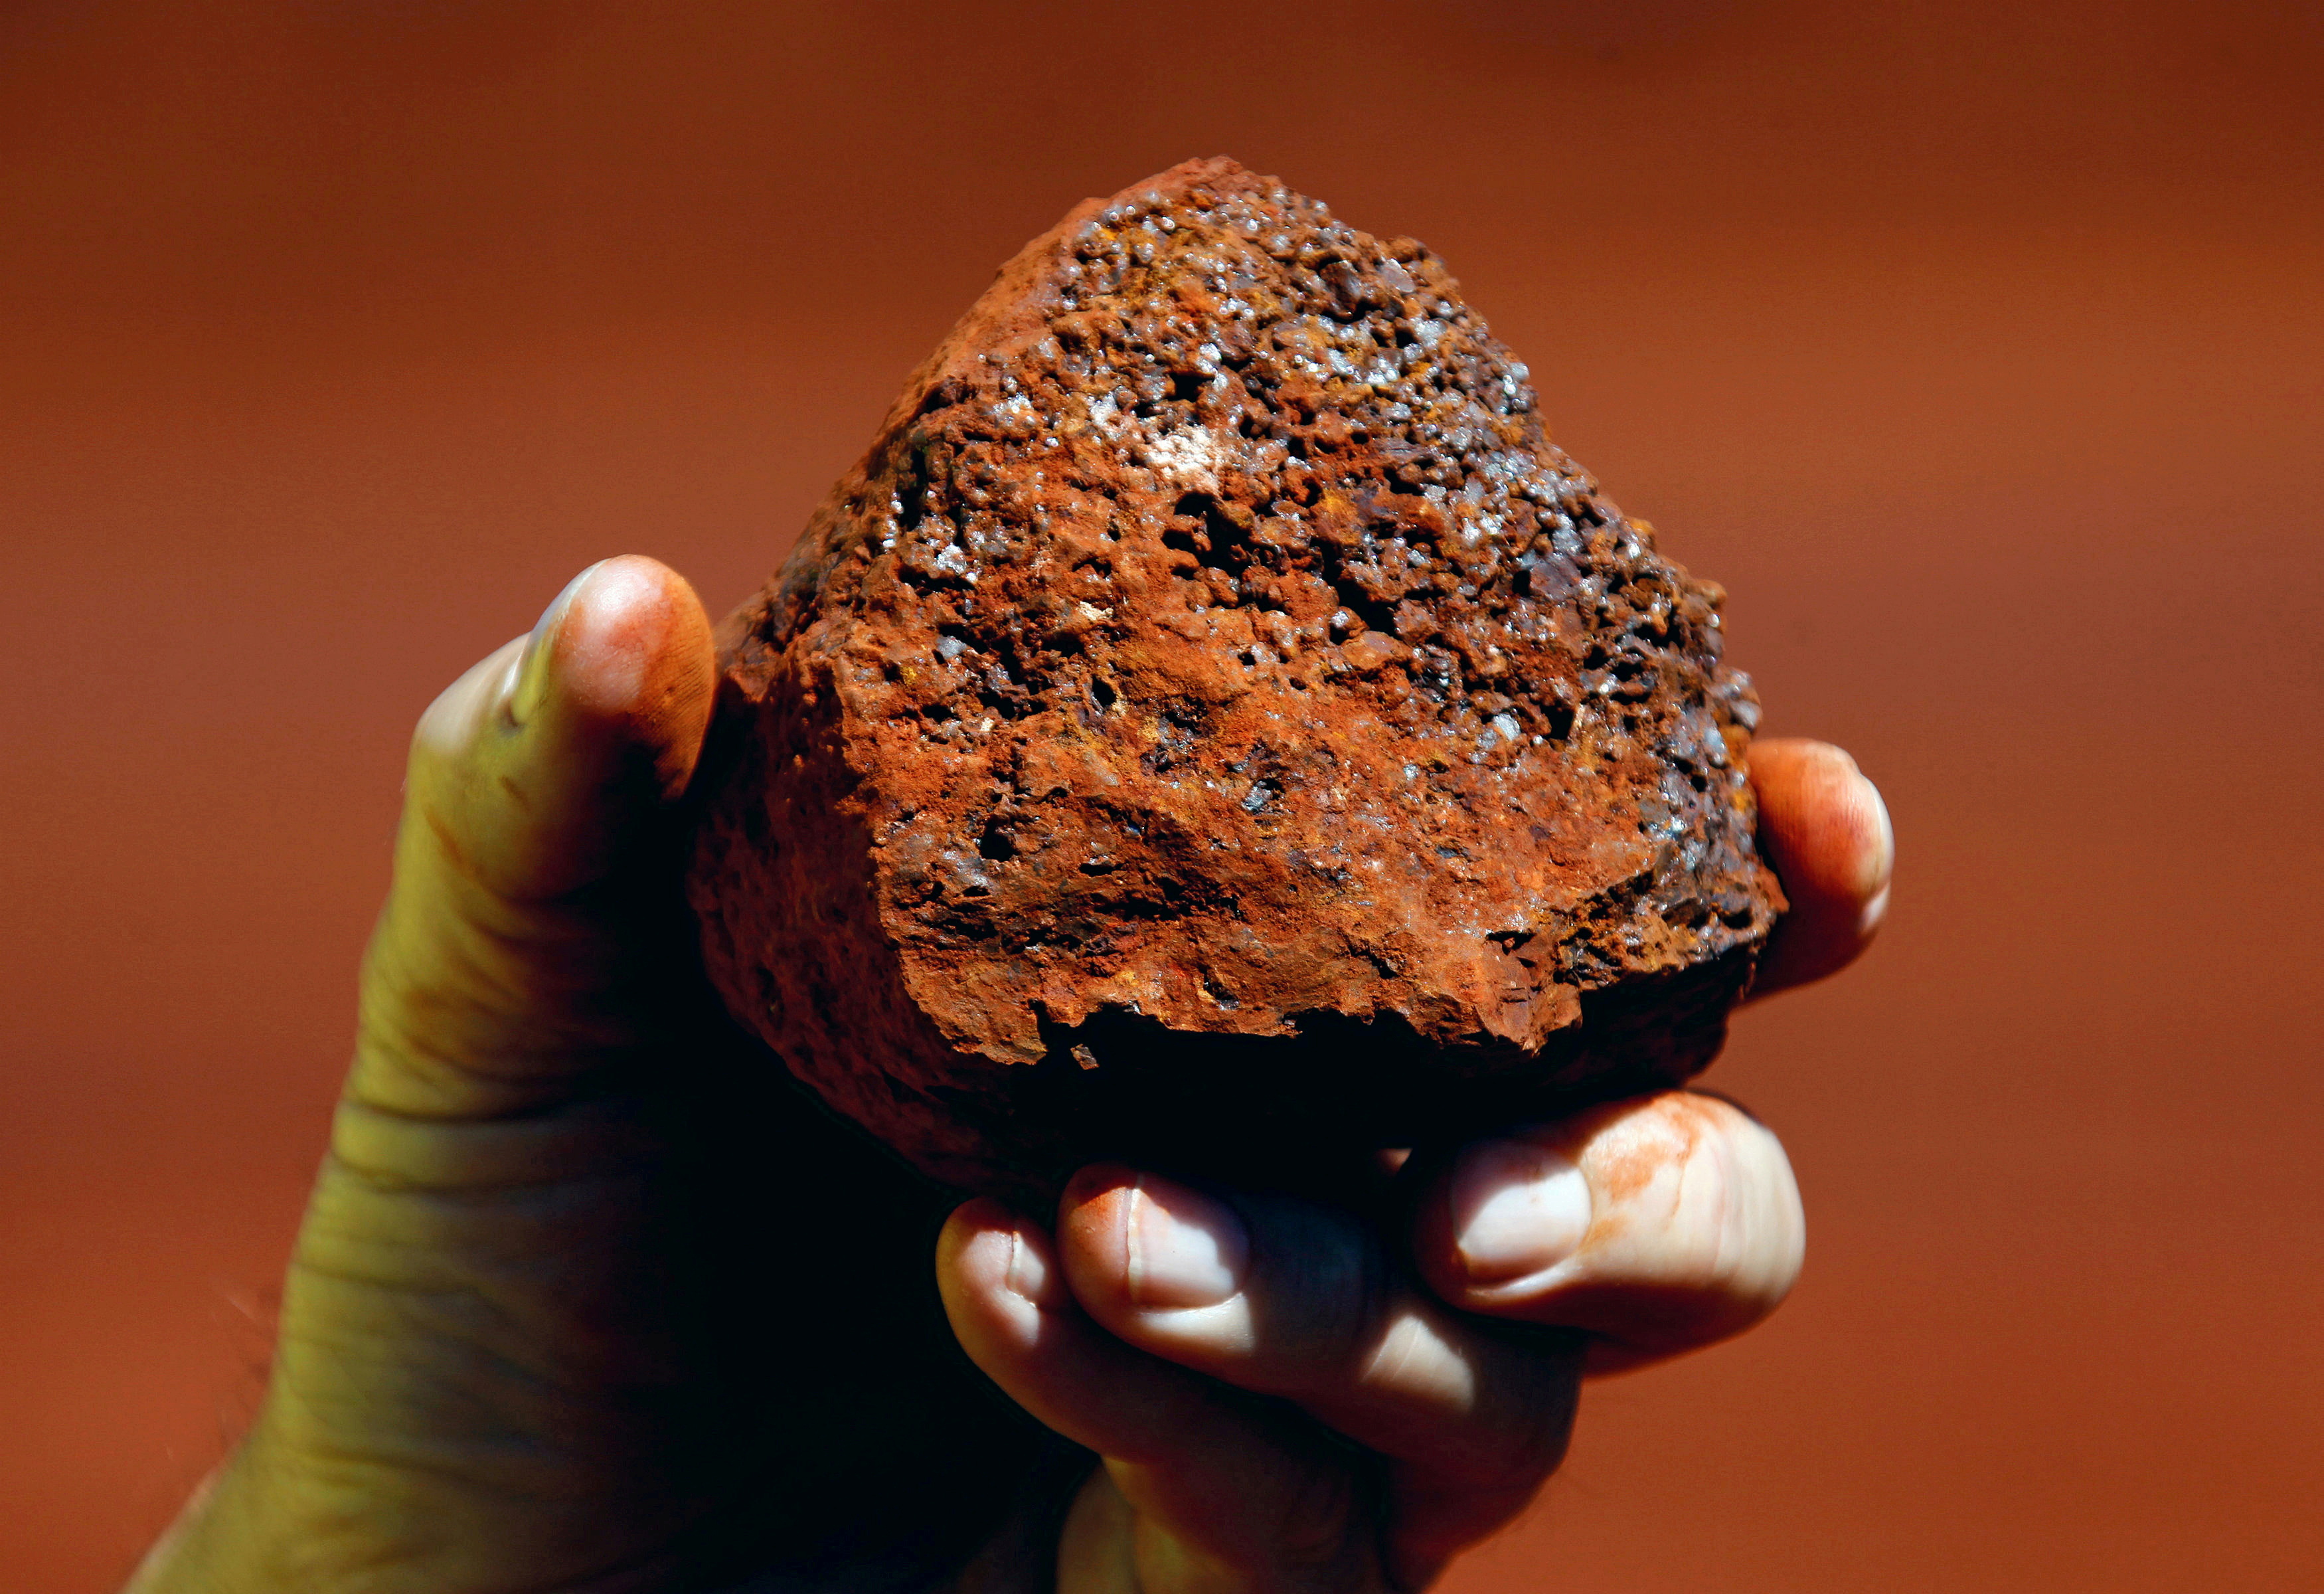 File photo of a miner holding a lump of iron ore at a mine located in the Pilbara region of Western Australia